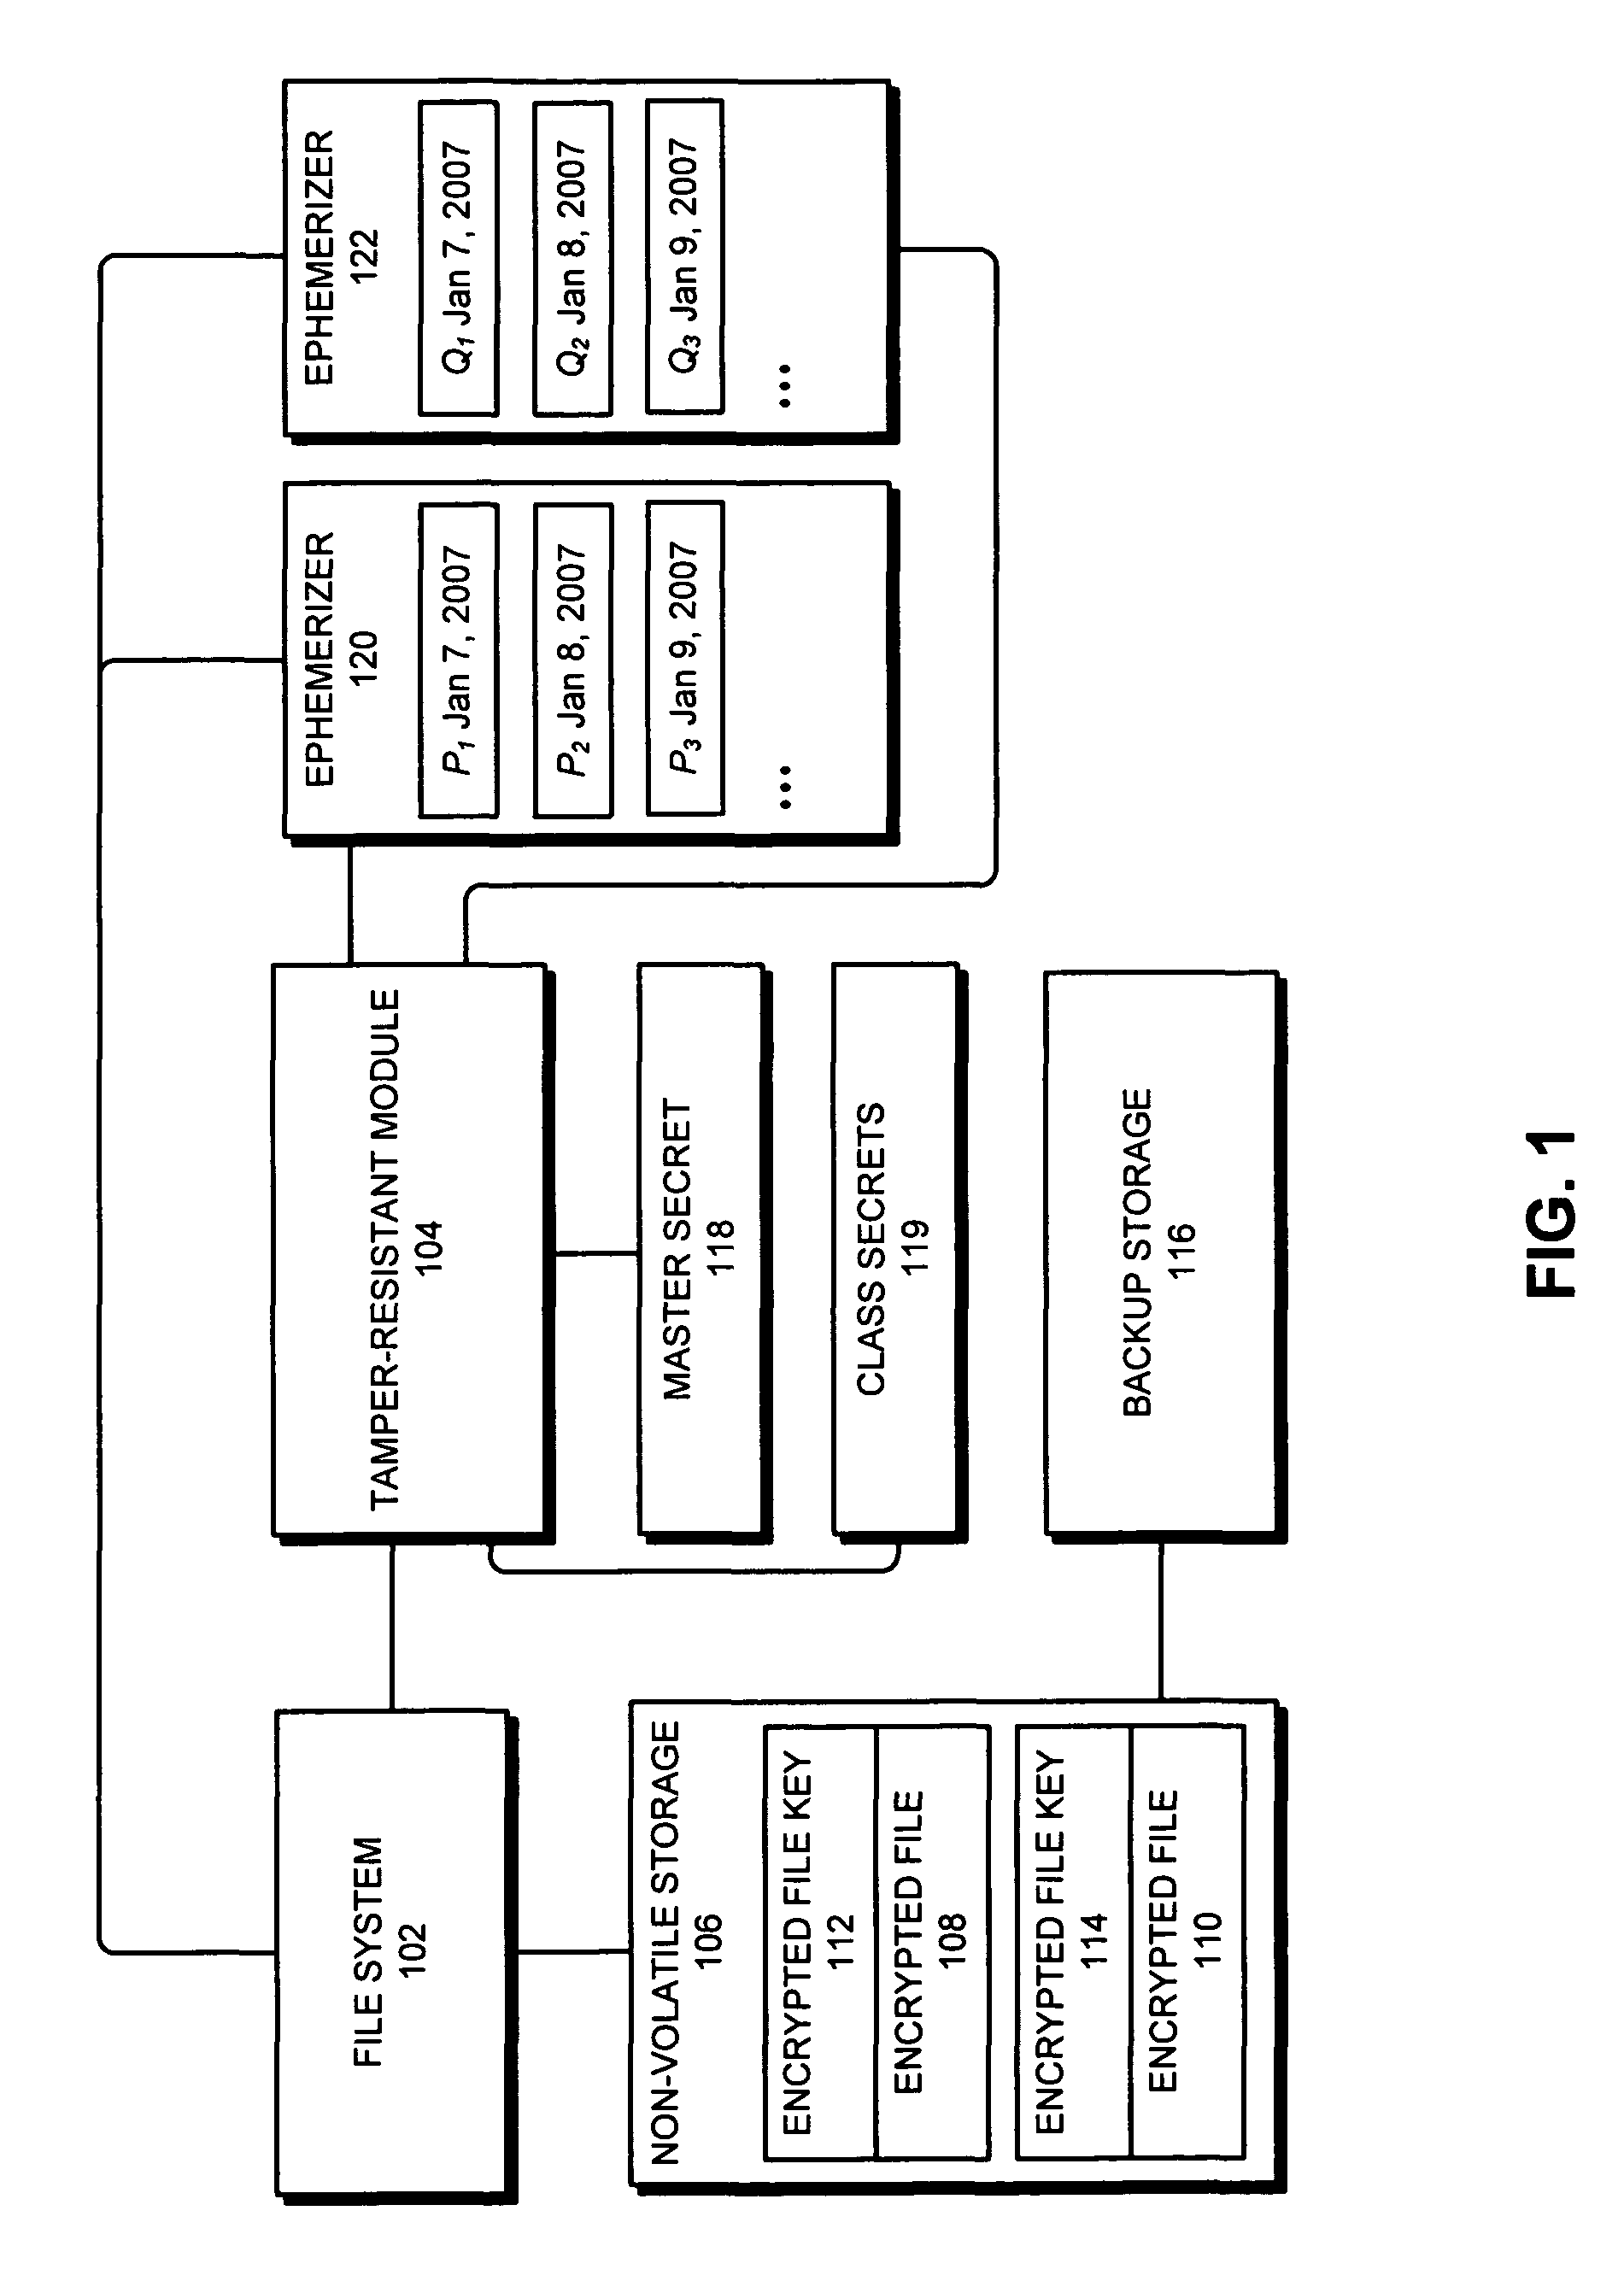 Method and apparatus for accessing an encrypted file system using non-local keys